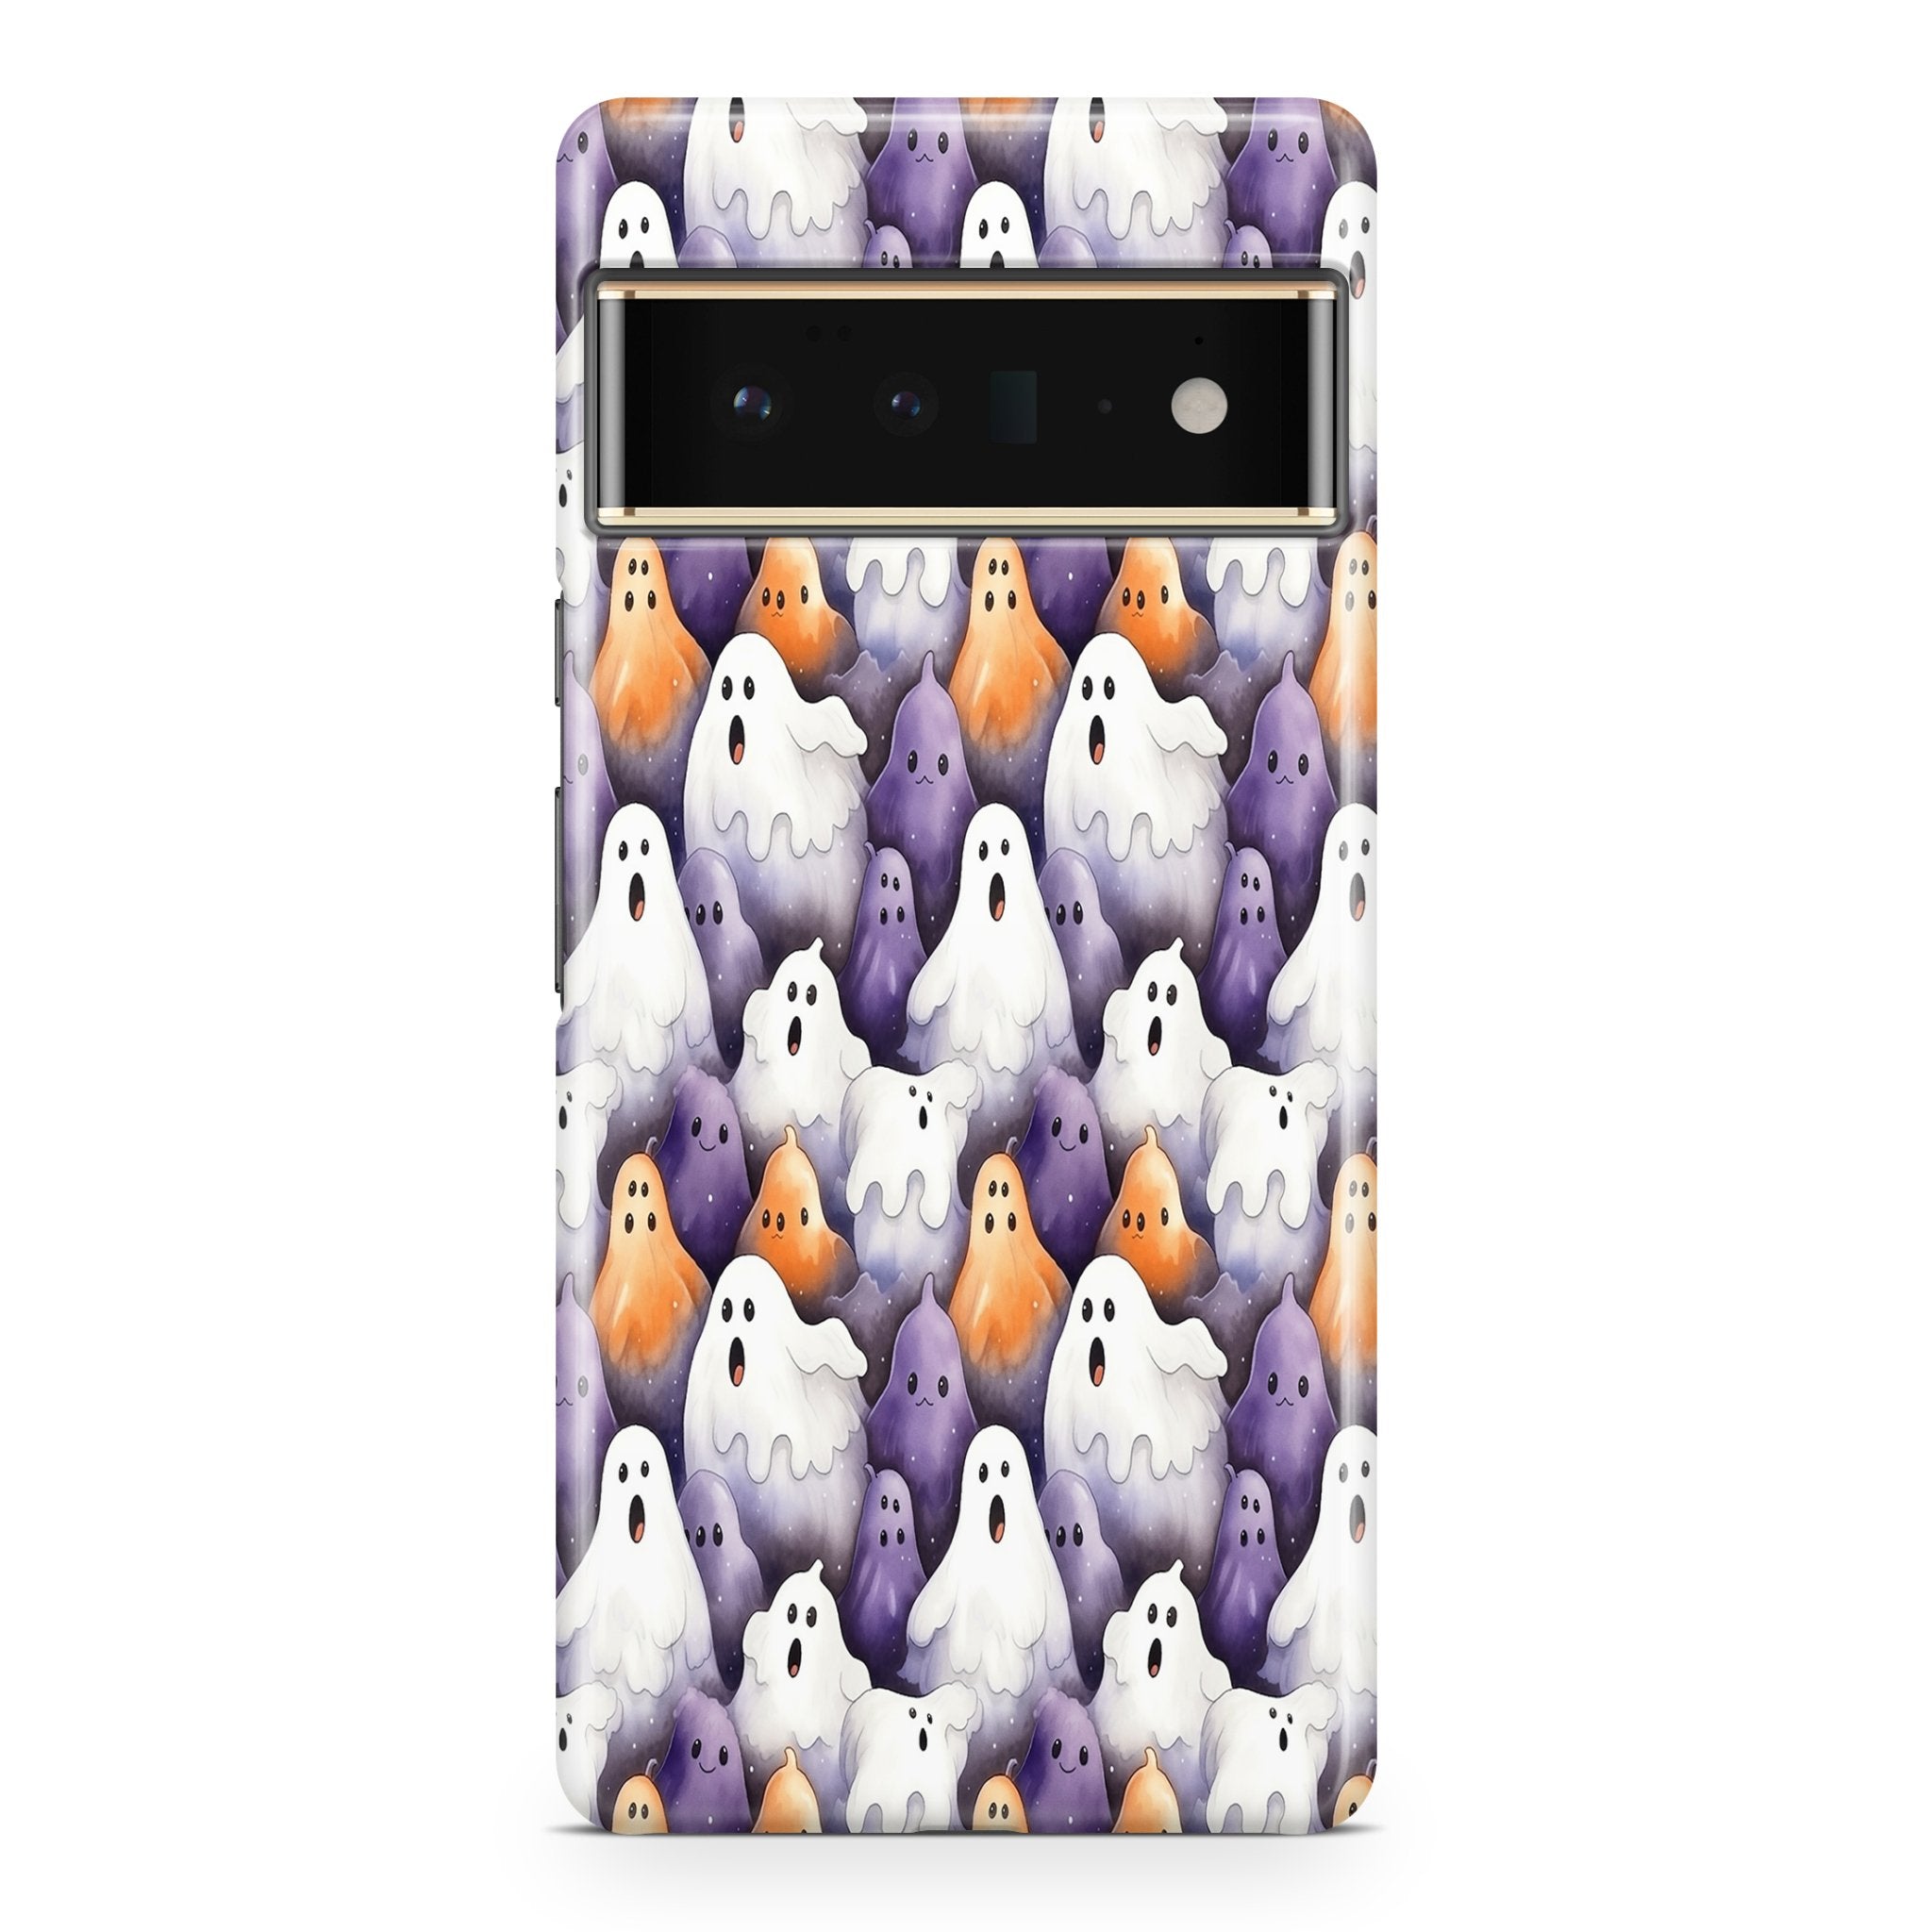 Spooky Ghosts - Google phone case designs by CaseSwagger